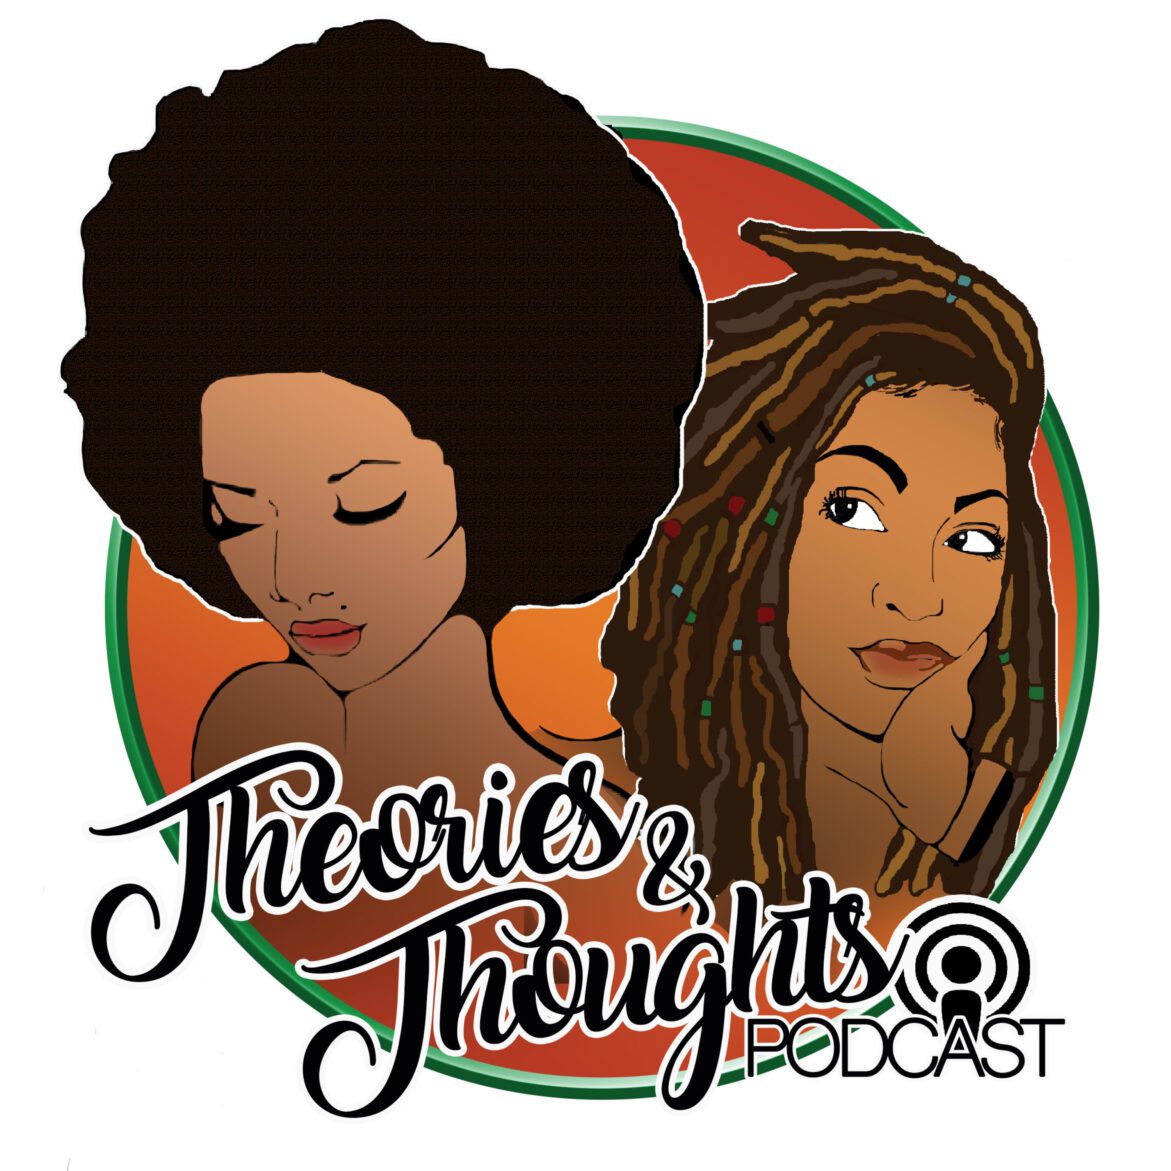 Black Podcasting - Theories & Thoughts: Season 2 - Episode 5: The Importance of Sisterhood w/ Nickie Marshall-Williams